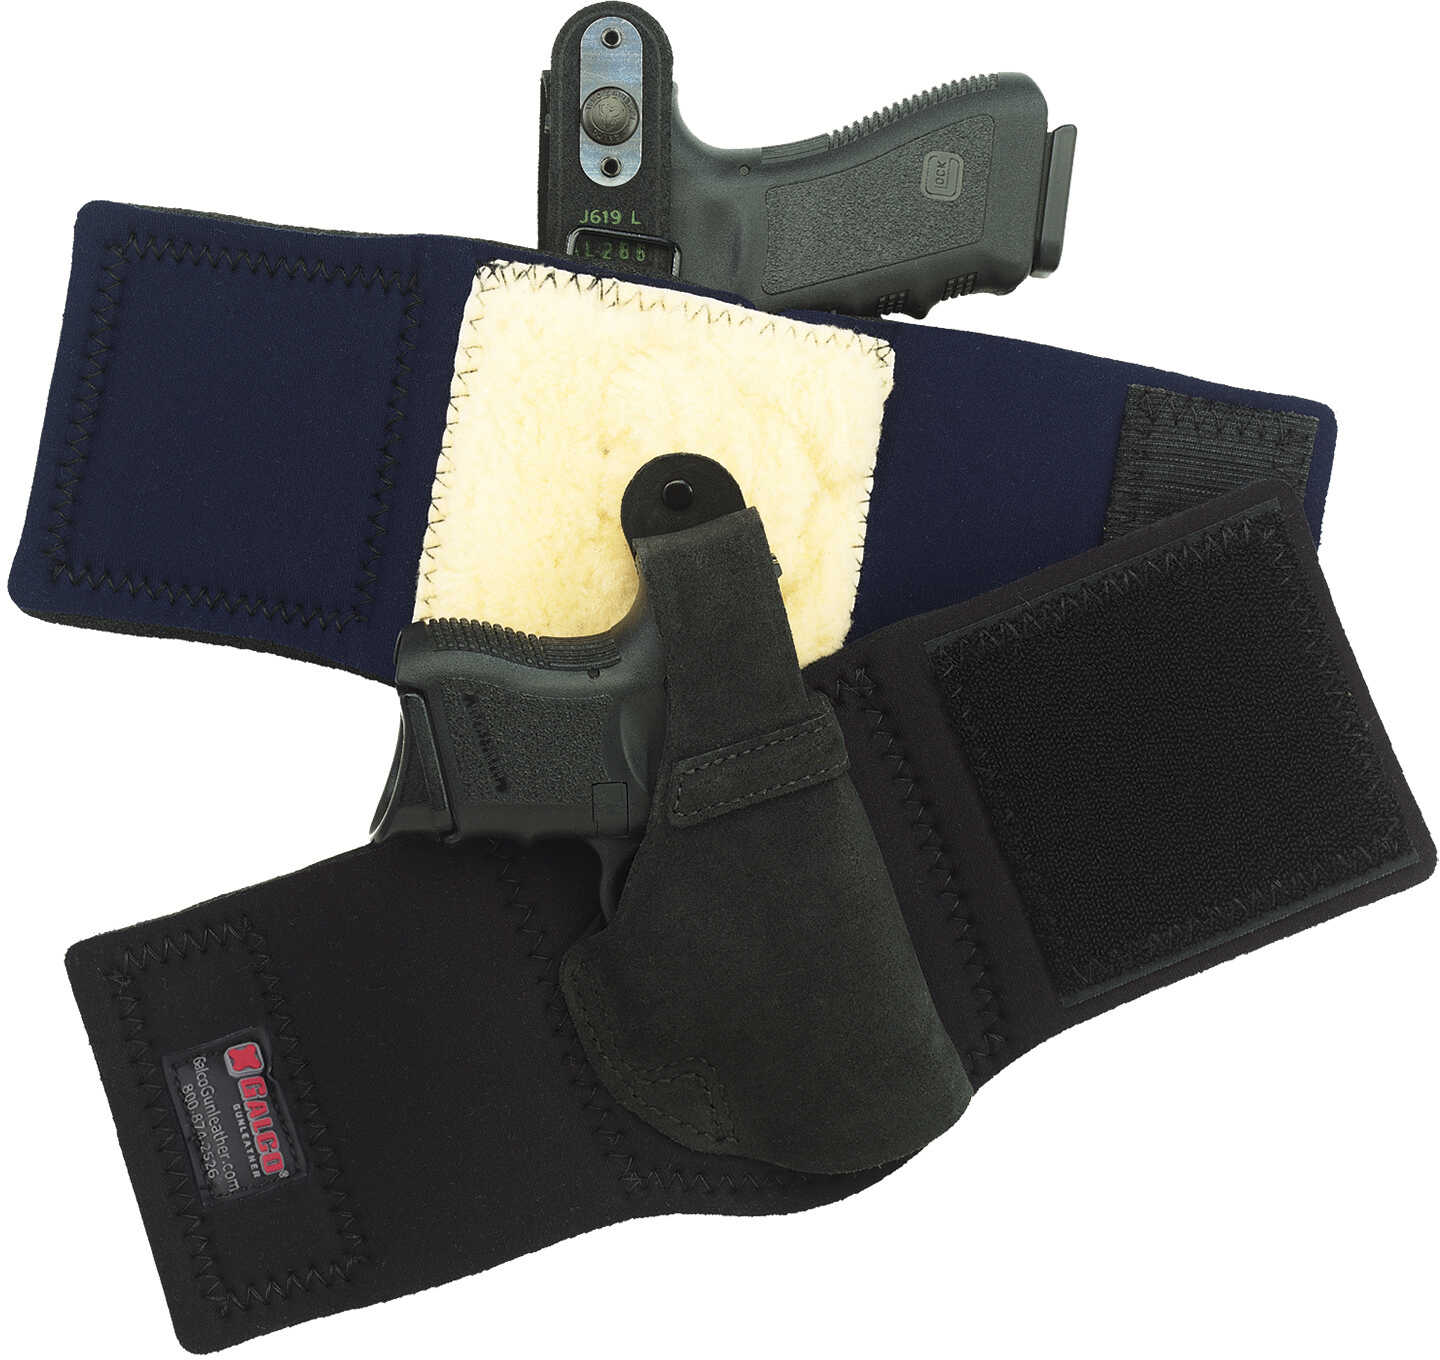 Galco Ankle Lite Holster Black RH Fits Honor Defense Guard S&W M&P Shield 9/40 & 2.0 and more